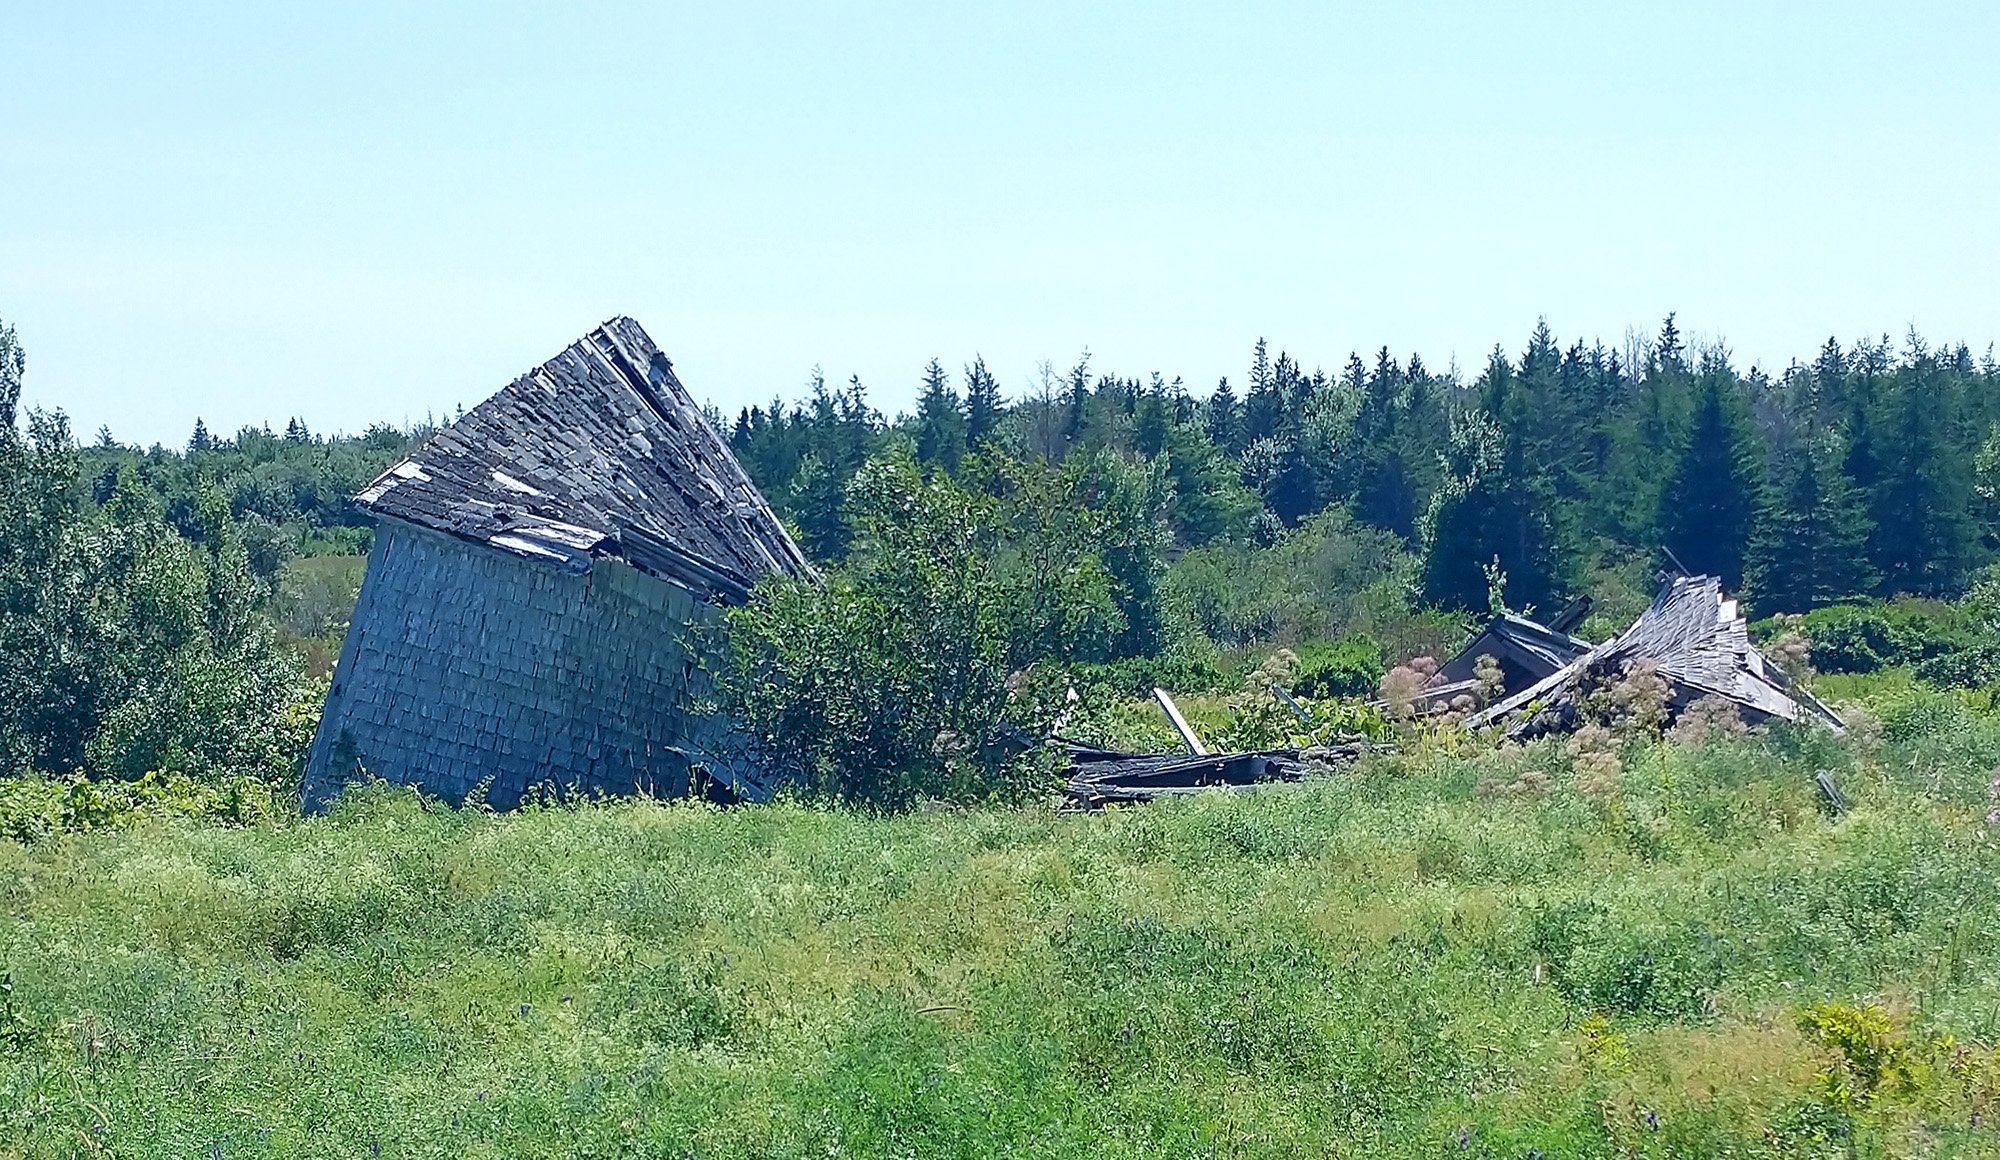 Don't forget the collapsed shack of the day!